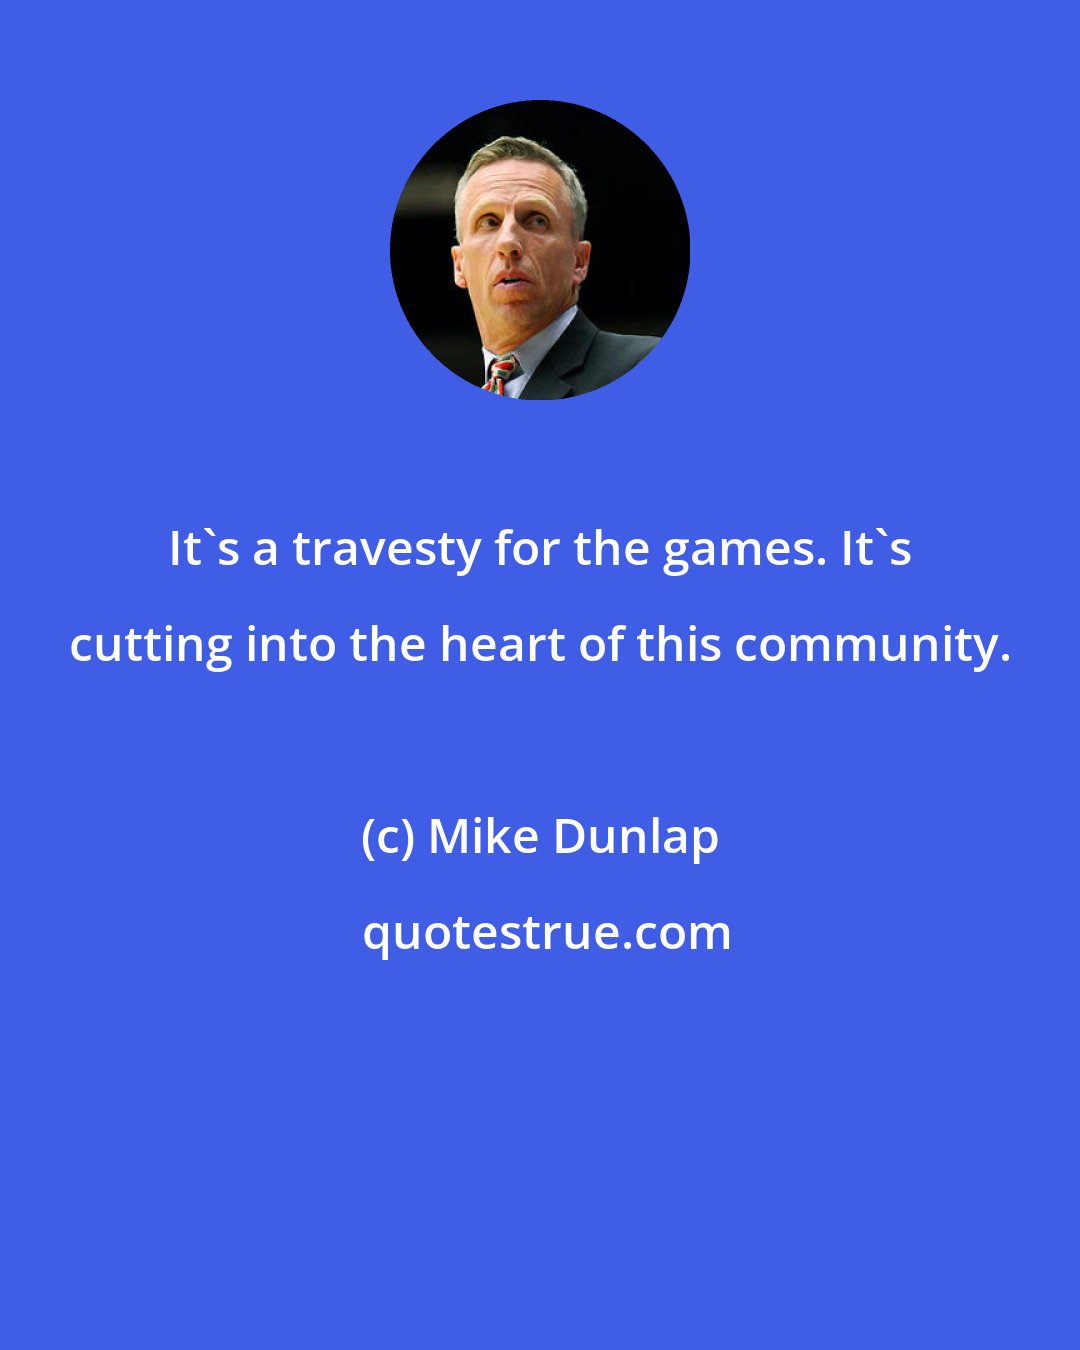 Mike Dunlap: It's a travesty for the games. It's cutting into the heart of this community.